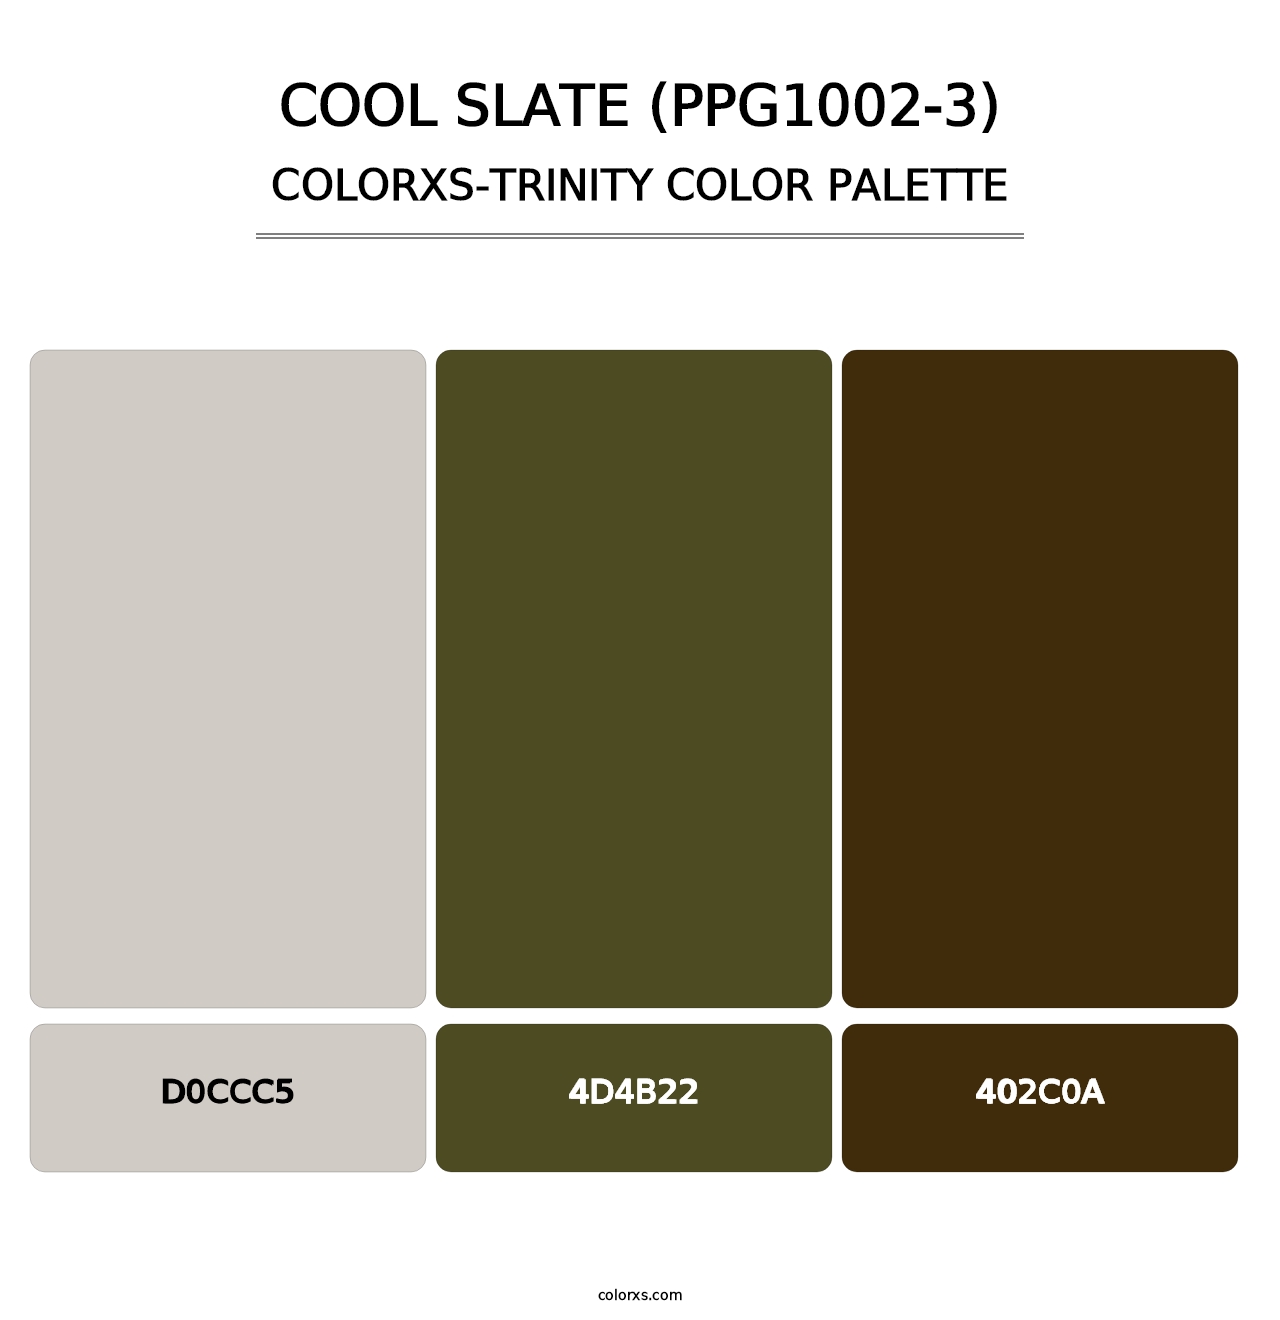 Cool Slate (PPG1002-3) - Colorxs Trinity Palette